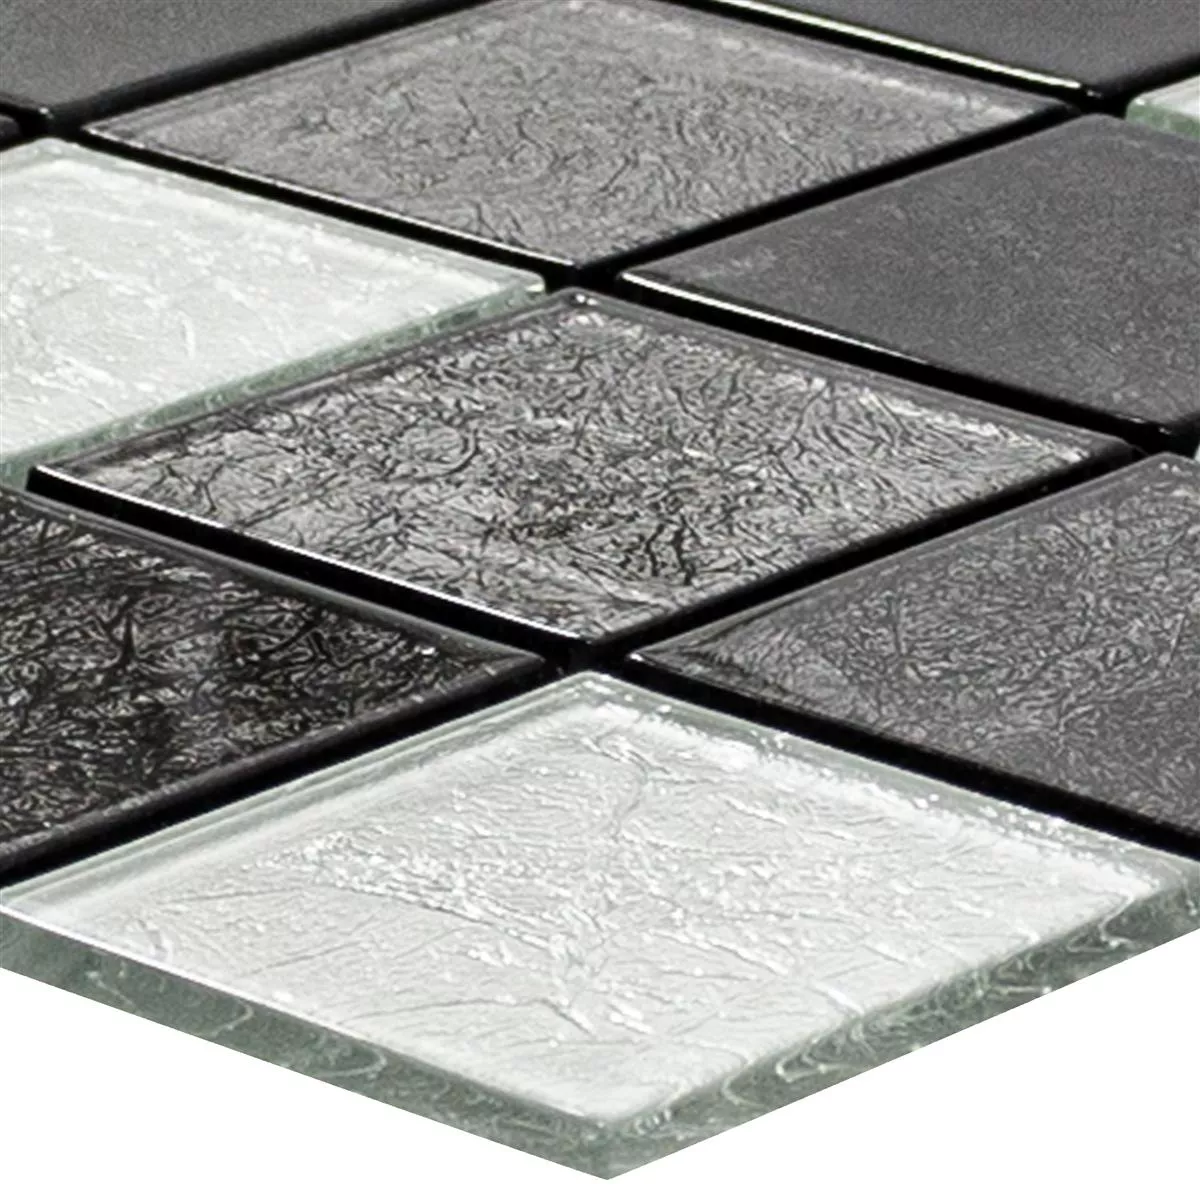 Glass Mosaic Tiles Curlew Black Silver Q48 4mm